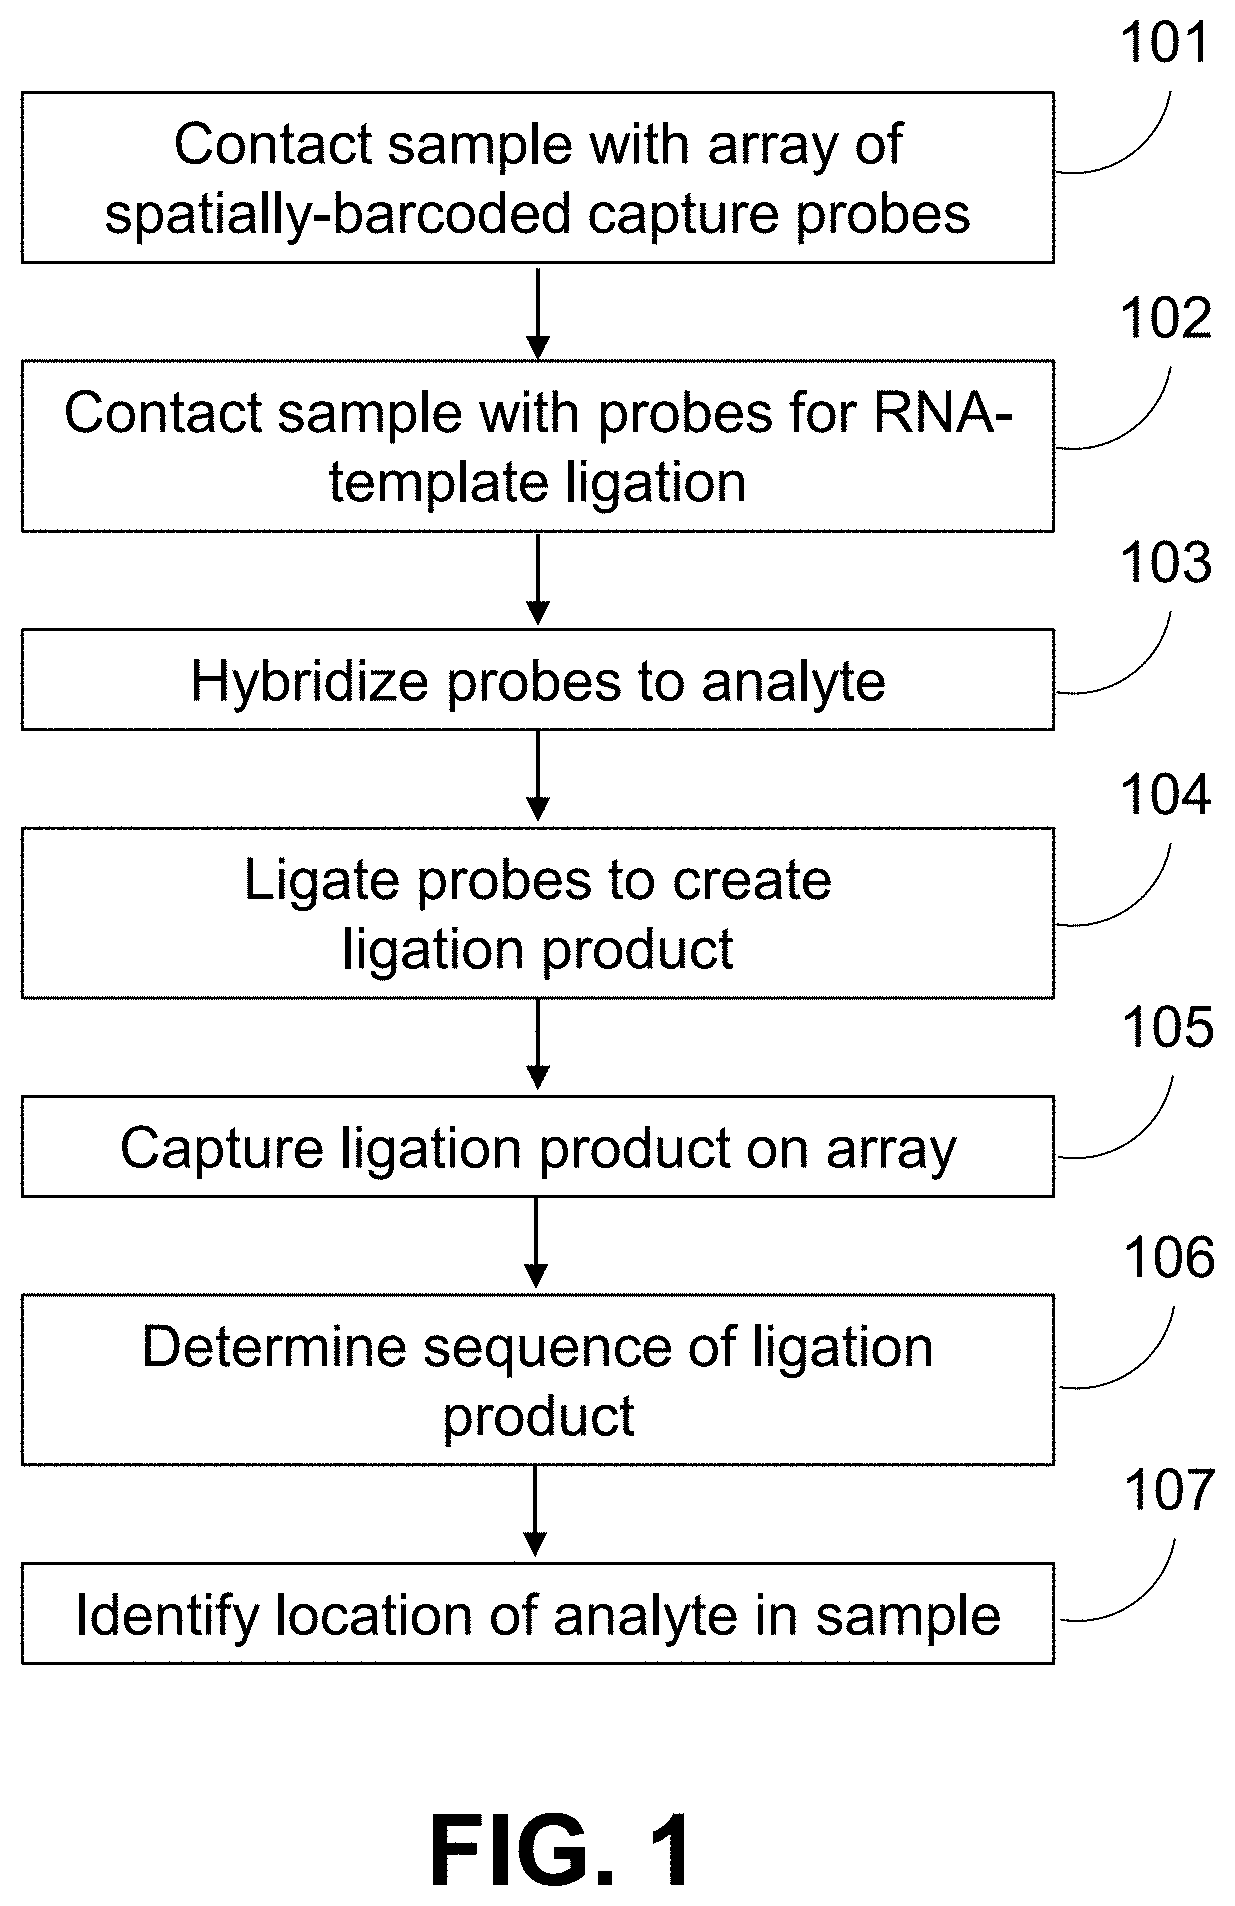 Methods for spatial analysis using rna-templated ligation